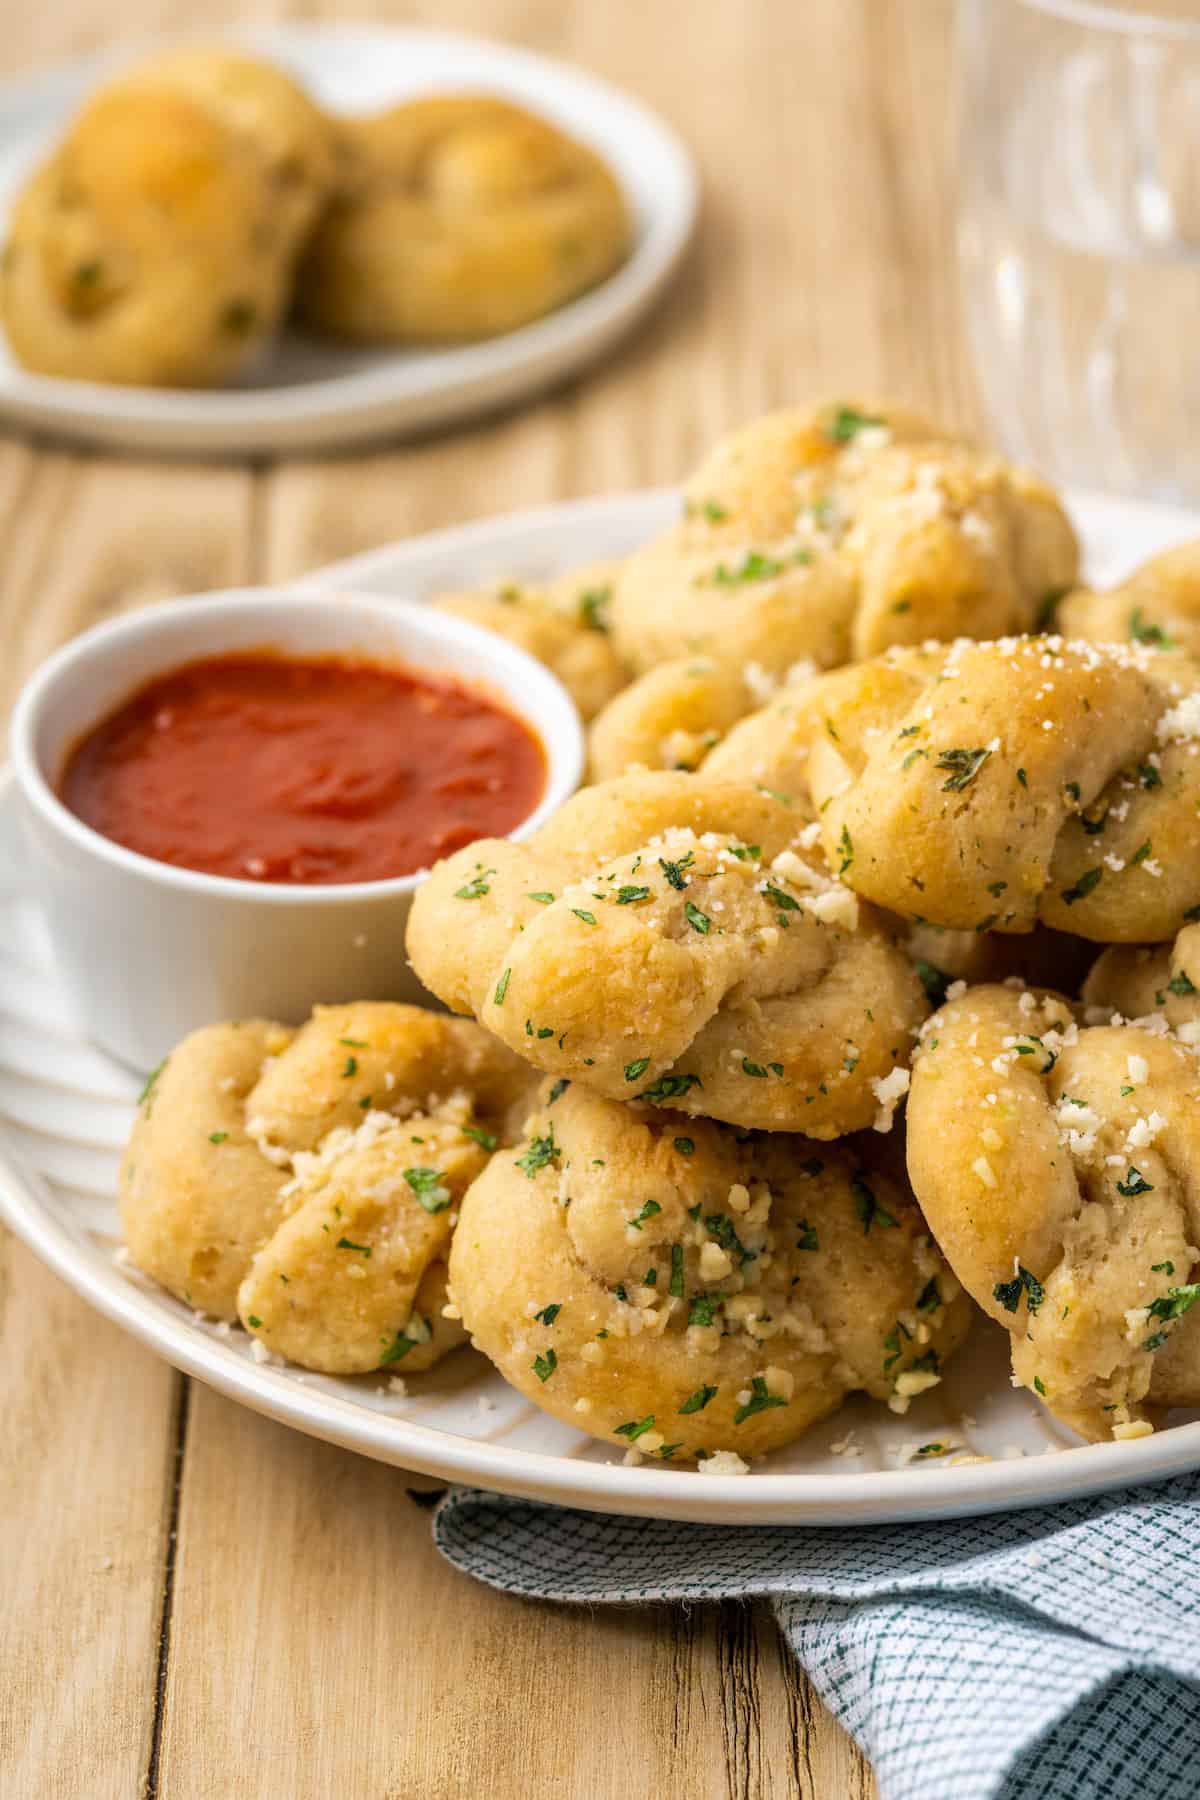 Gluten-free garlic knots stacked on a plate next to a bowl of marinara sauce.